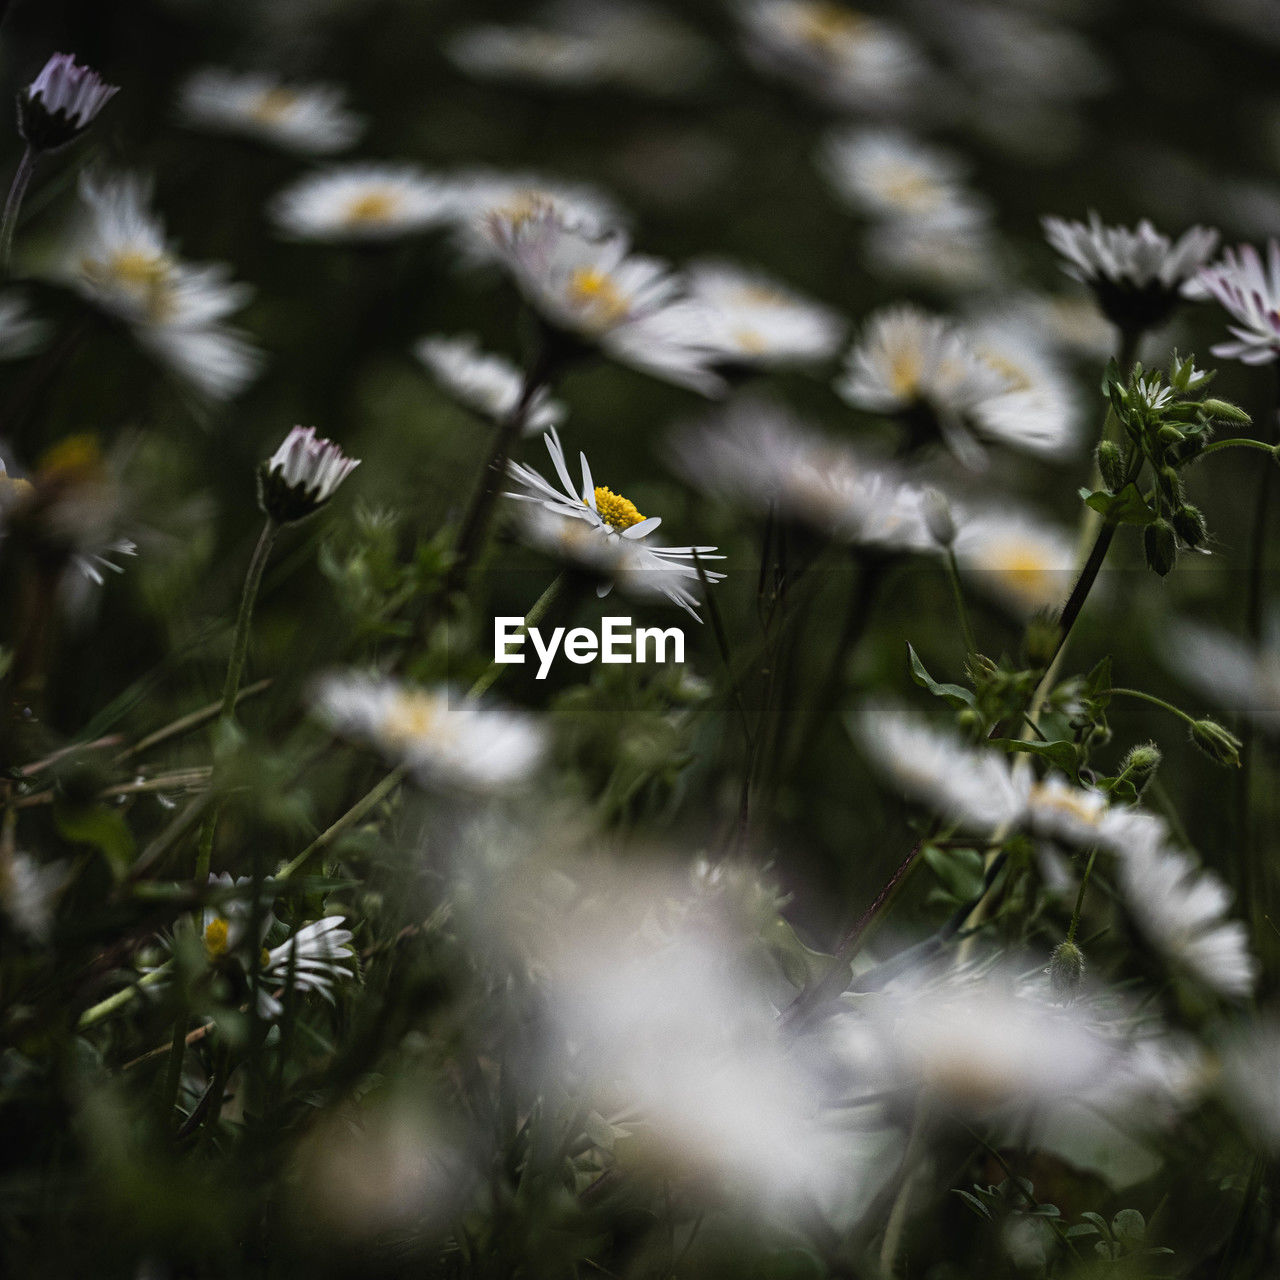 plant, nature, flower, flowering plant, beauty in nature, grass, macro photography, freshness, no people, growth, selective focus, close-up, fragility, green, leaf, outdoors, day, tree, branch, animal wildlife, animal, wildflower, daisy, land, sunlight, white, animal themes, meadow, environment